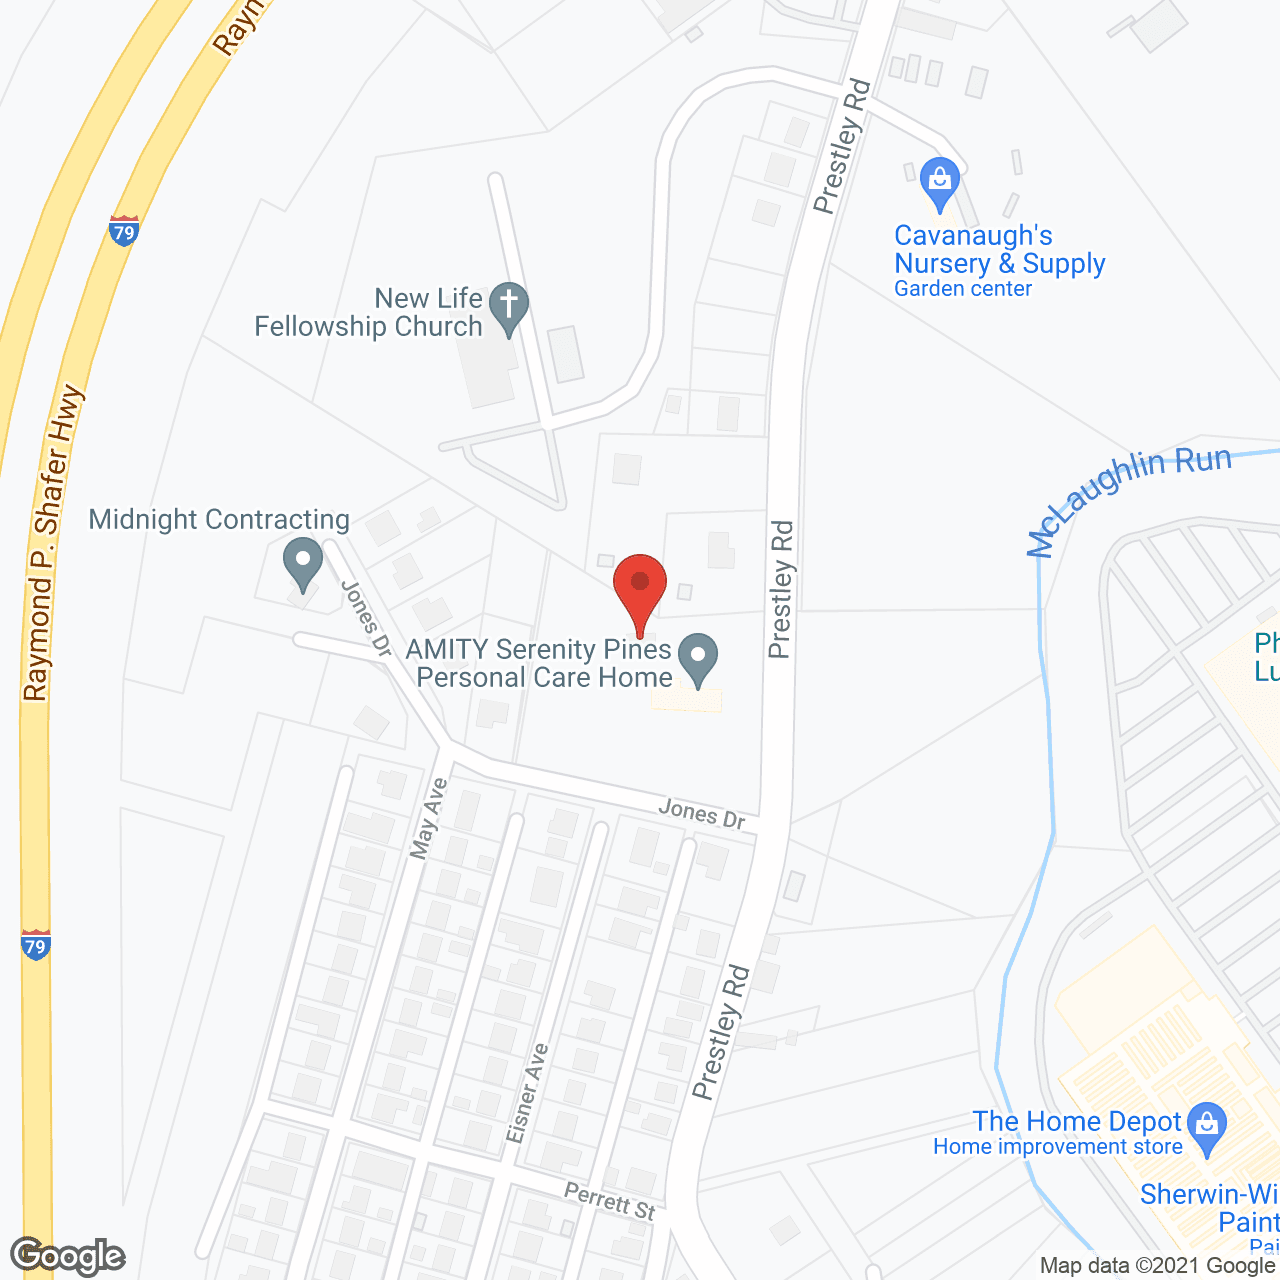 Amity Serenity Pines Personal Care Home in google map